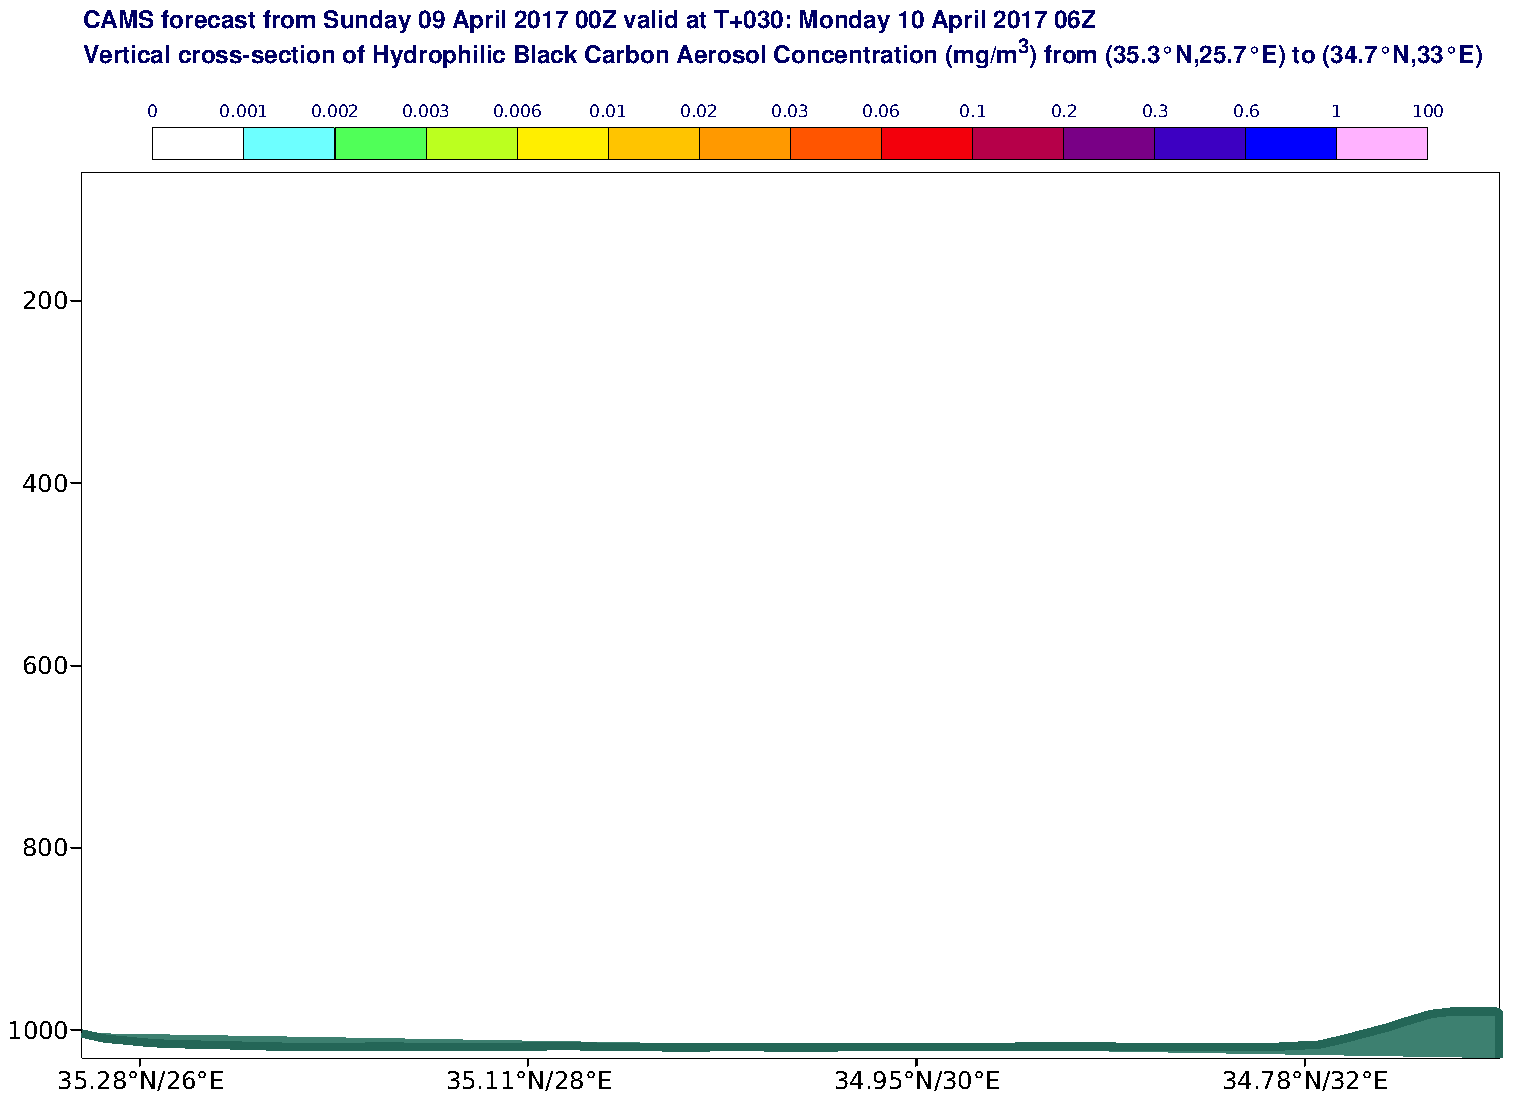 Vertical cross-section of Hydrophilic Black Carbon Aerosol Concentration (mg/m3) valid at T30 - 2017-04-10 06:00